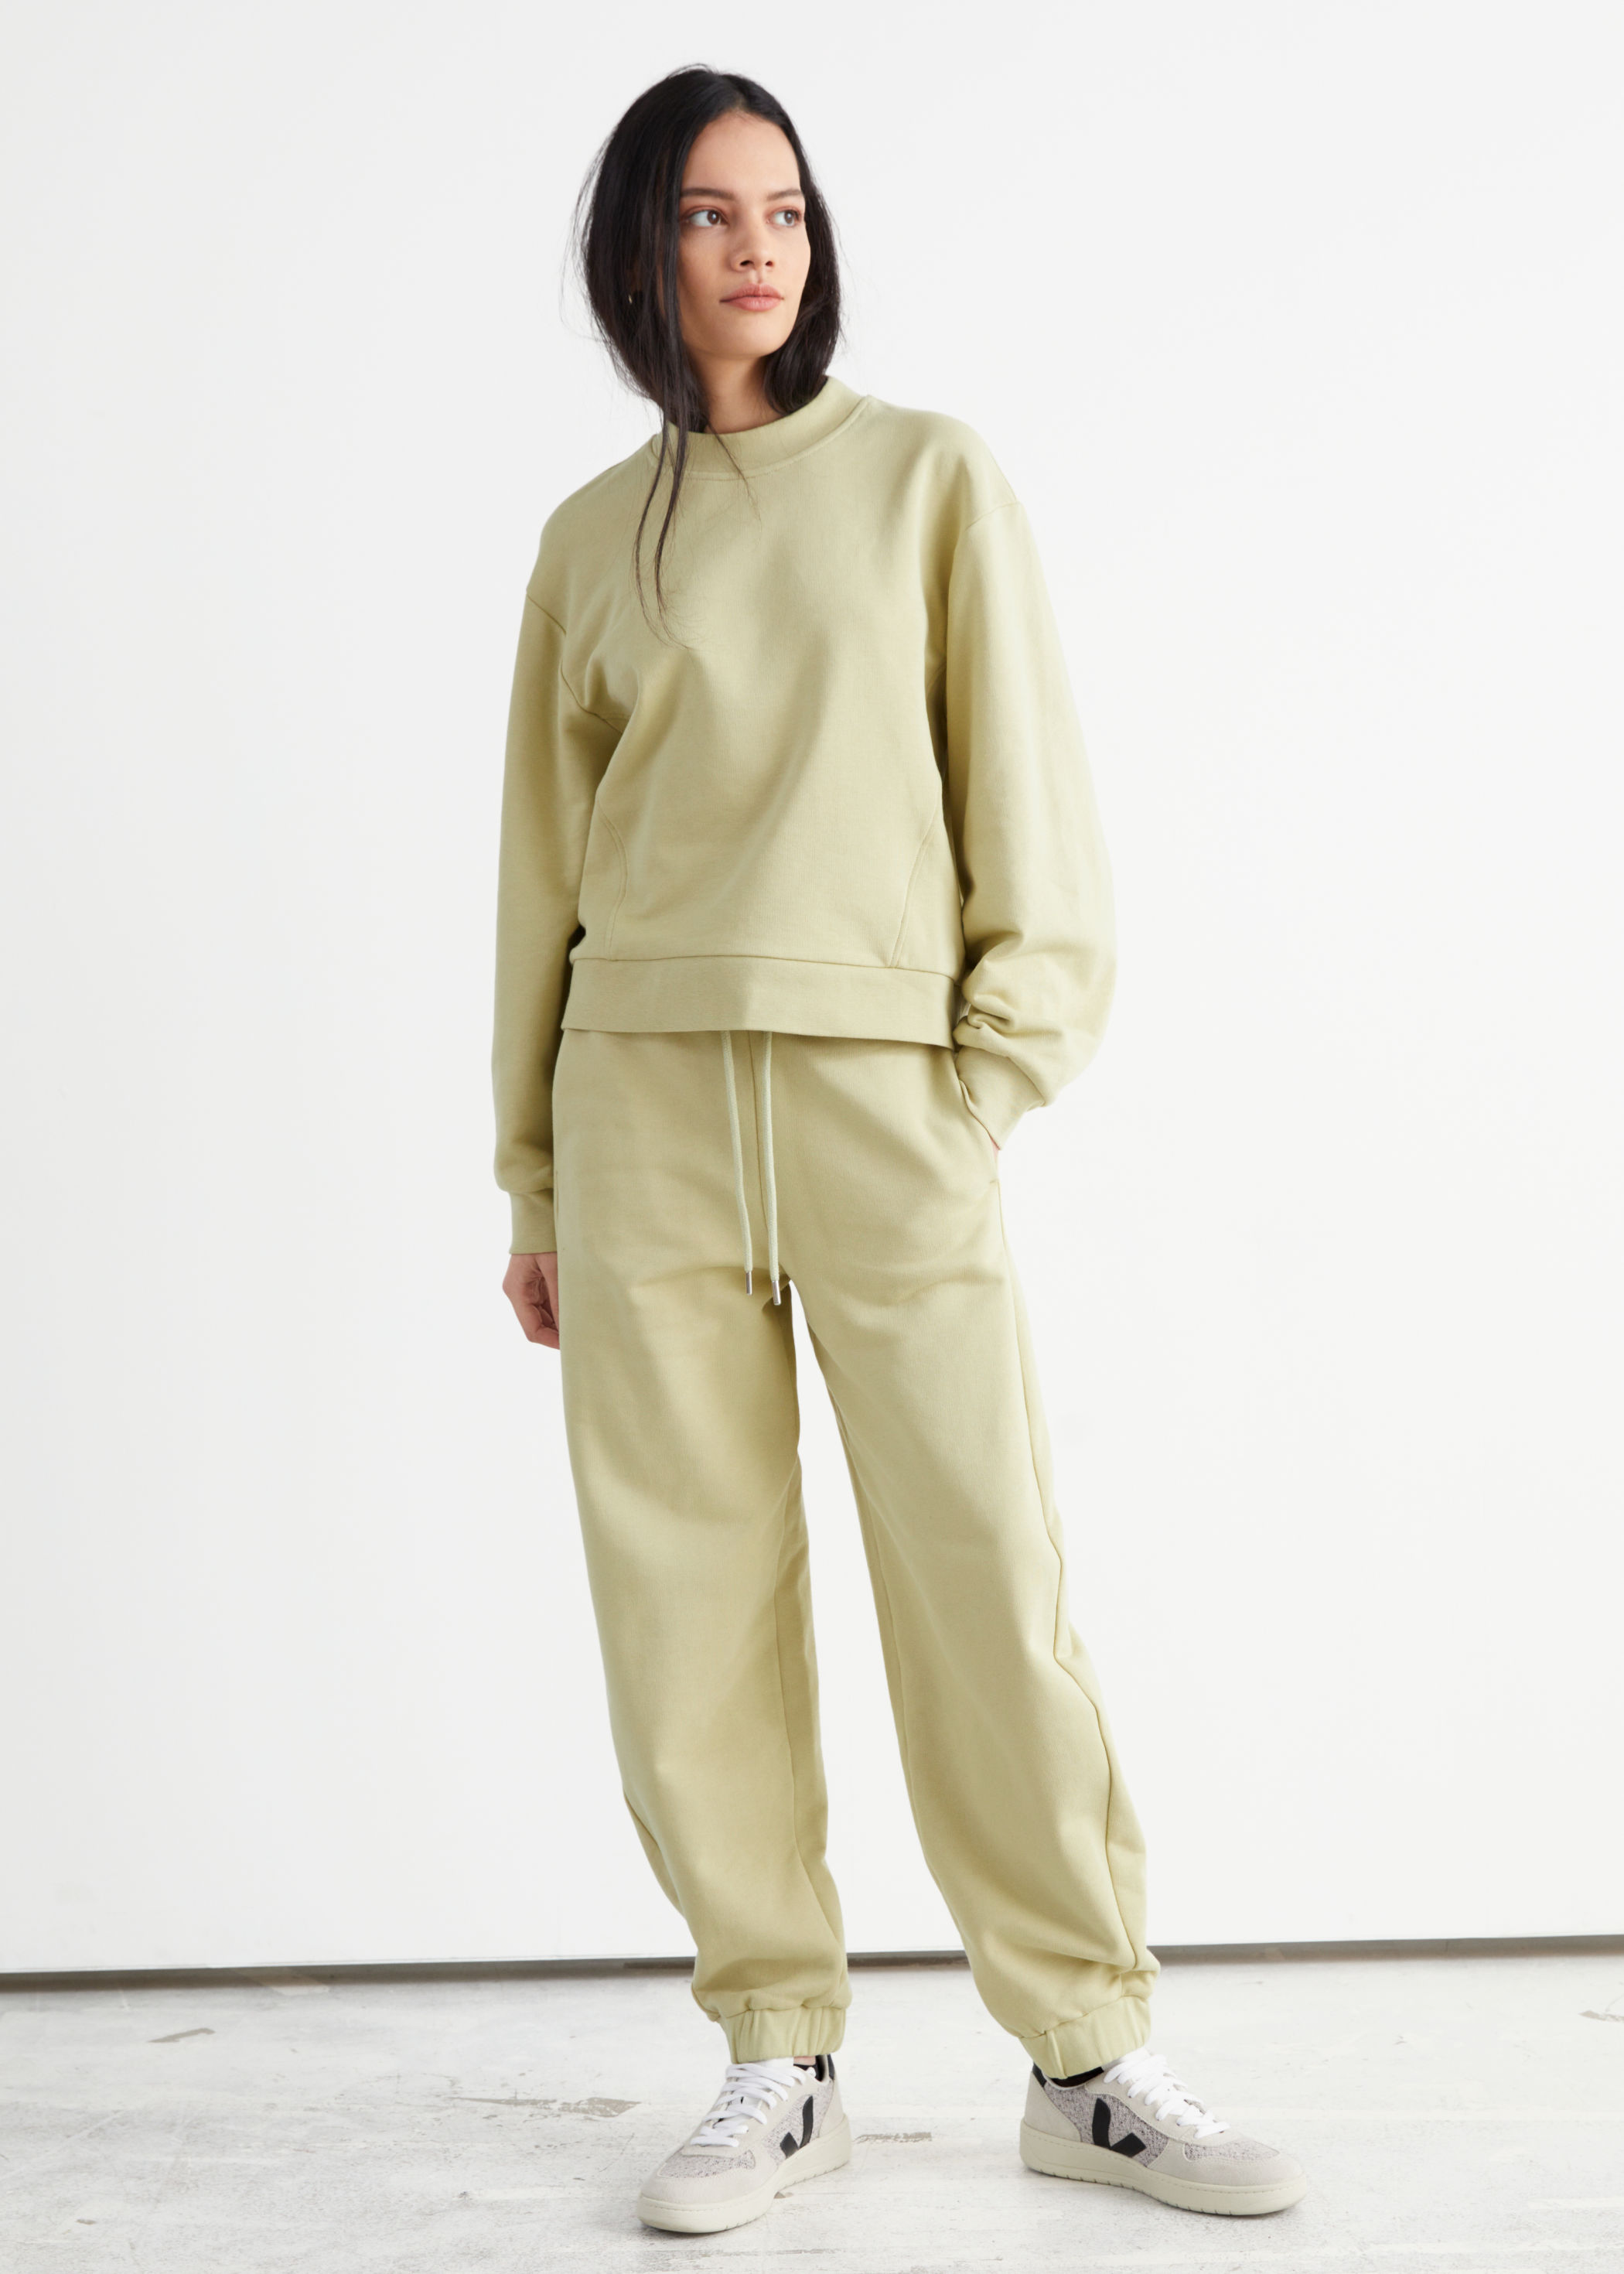 27 Matching Sweatsuits For Living Your Best Stay-At-Home Life